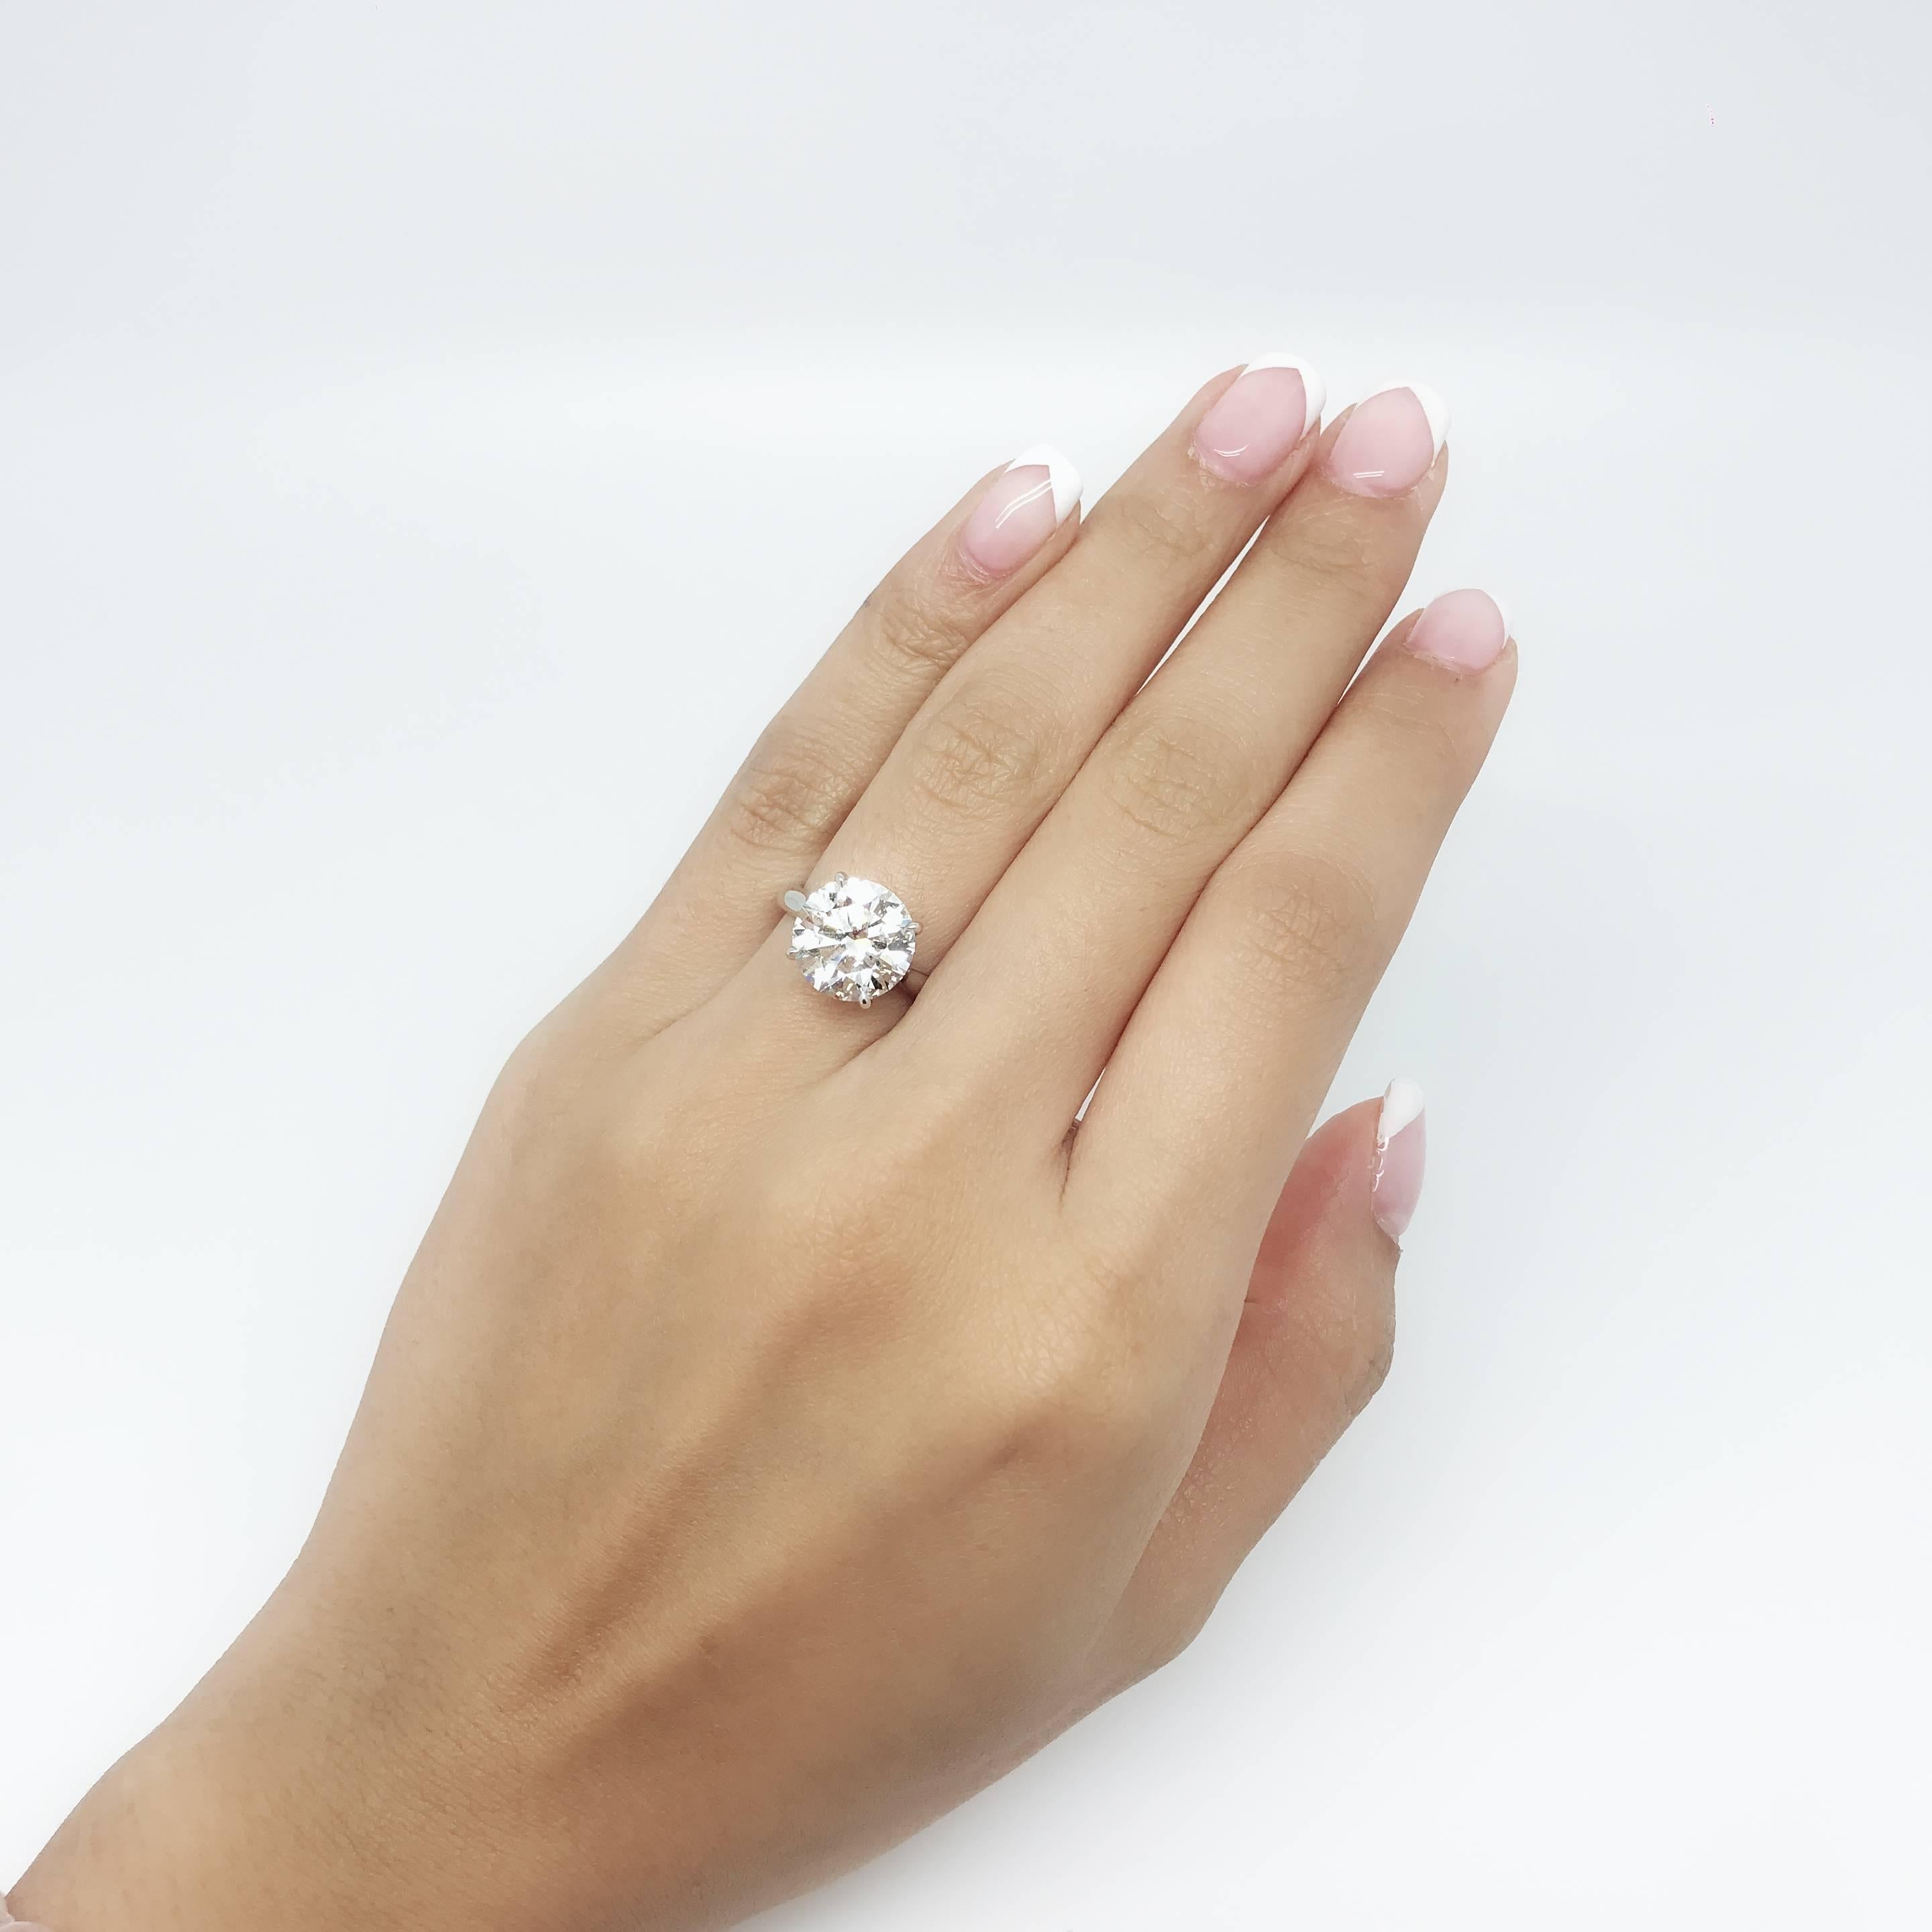 Discover the perfect engagement ring for her. This classic 5.06 carat diamond engagement ring is surely the one of a kind.
Colour: F
Clarity: SI1
Excellent for Cut, Polish and Symmetry
No fluorescence 